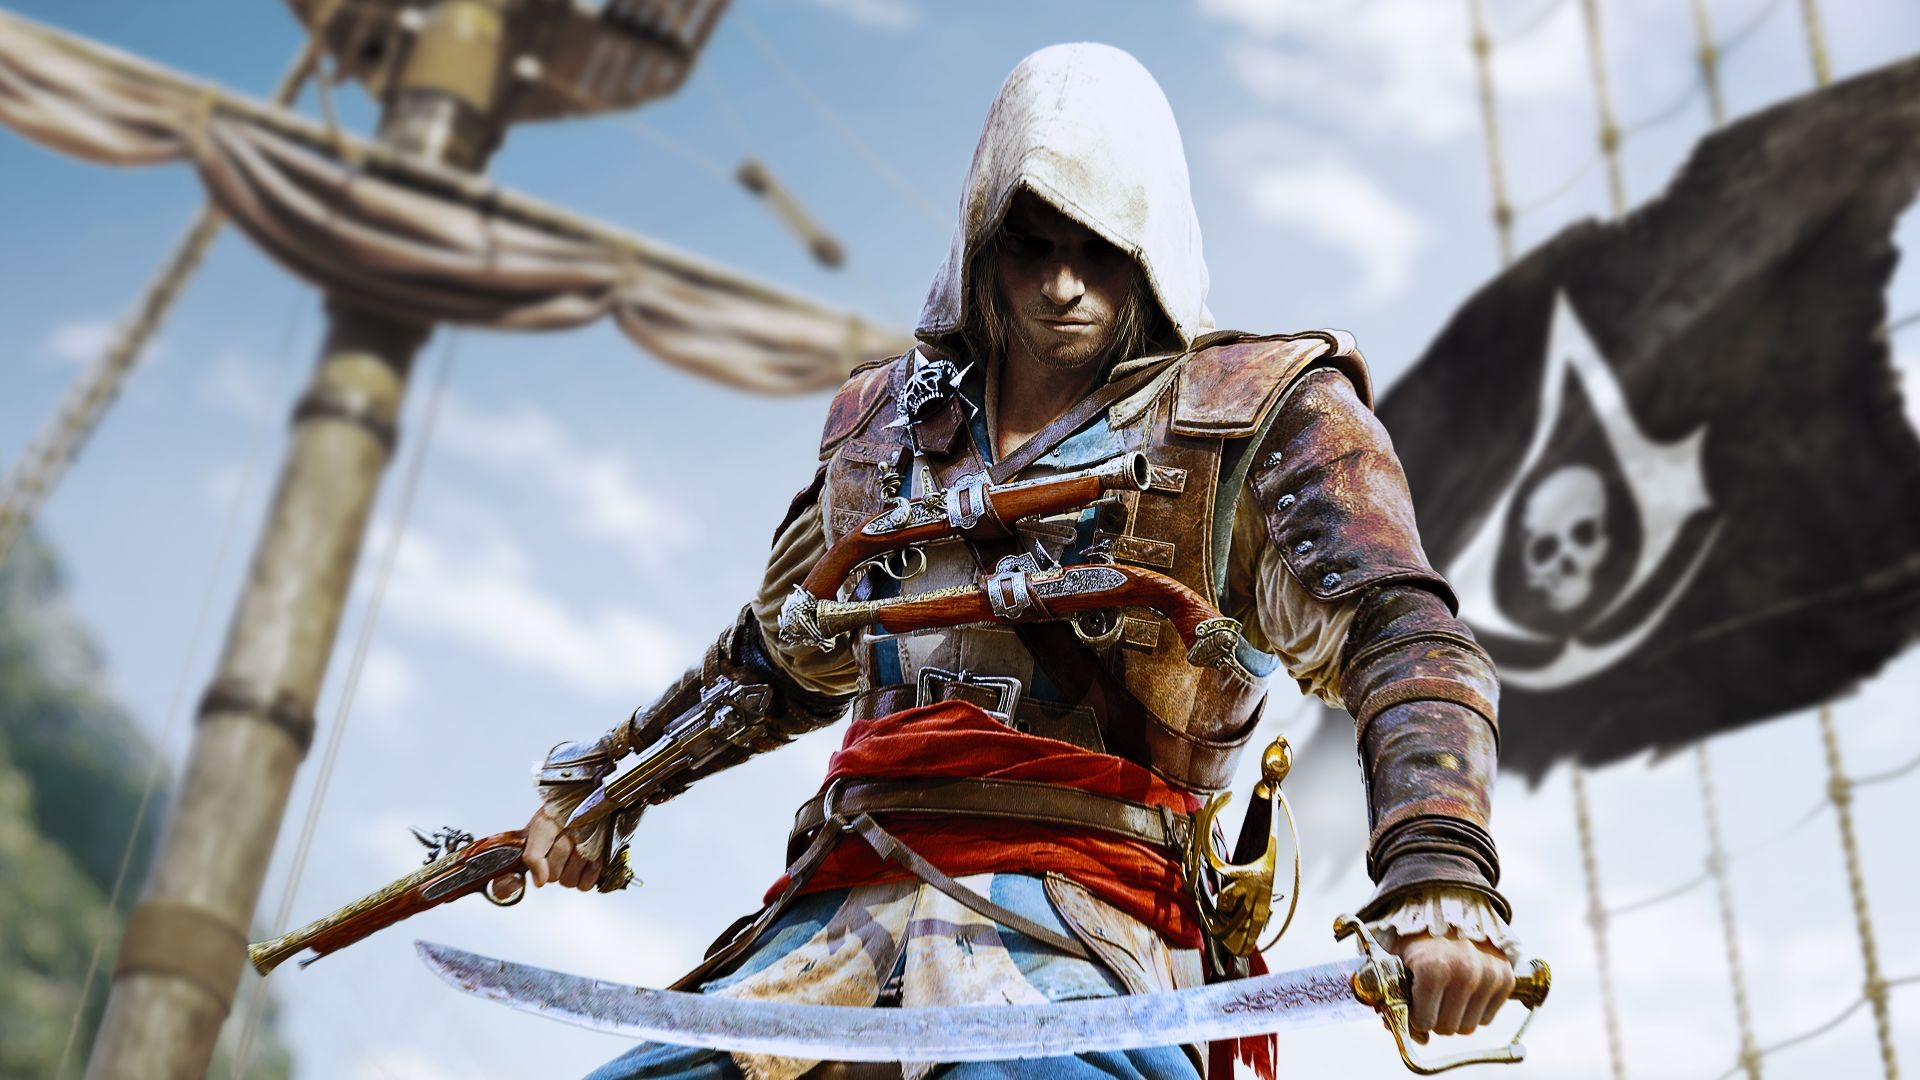 Ubisoft Is Working on an Assassin's Creed 4: Black Flag Remake -First